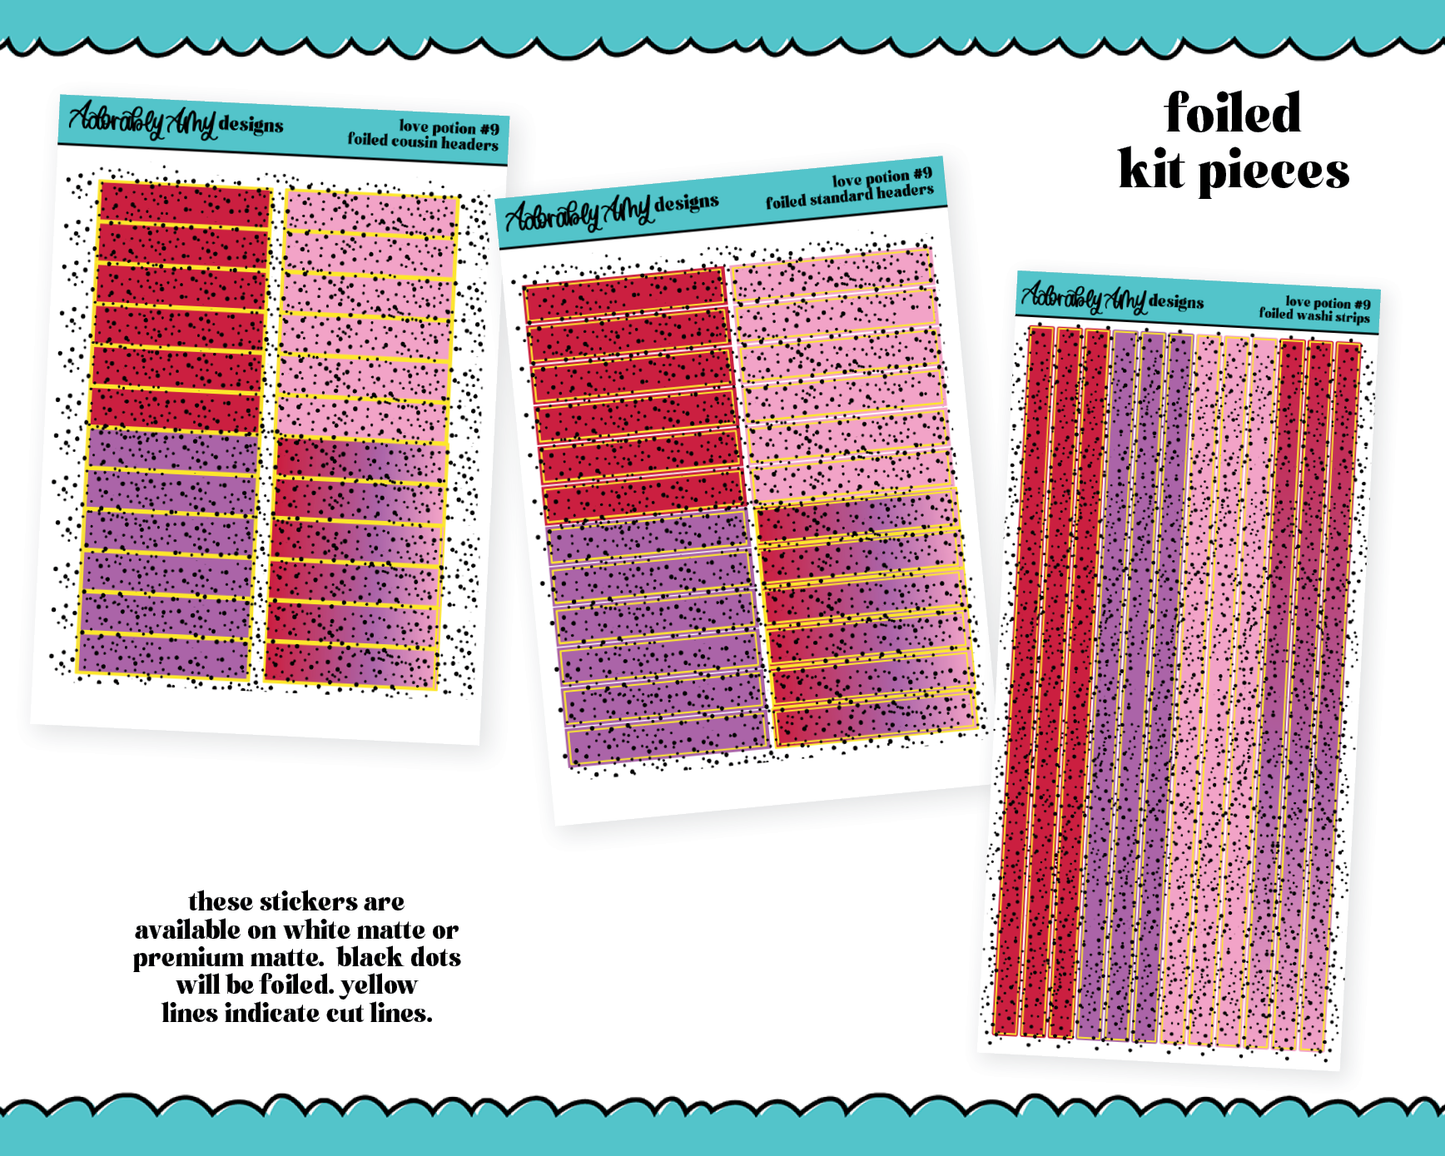 Foiled Love Potion #9 Headers or Long Strips Planner Stickers for any Planner or Insert